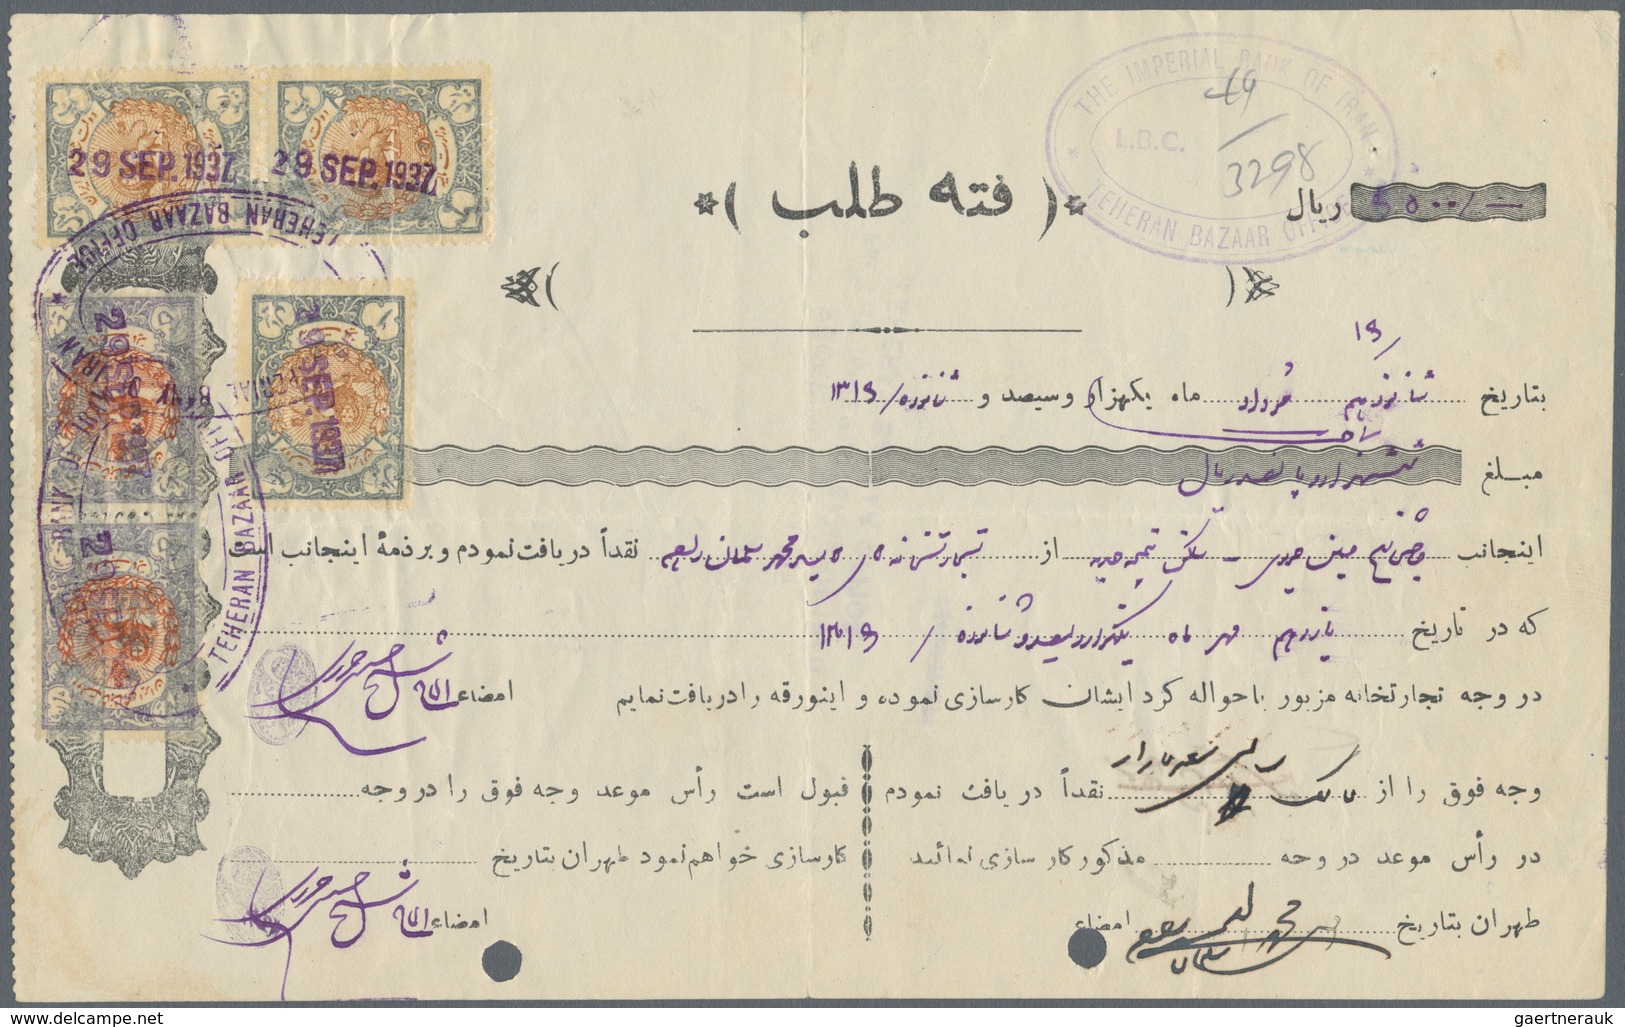 Iran: set of 10 different exchange certificates with different bank stamps and additional stamps on